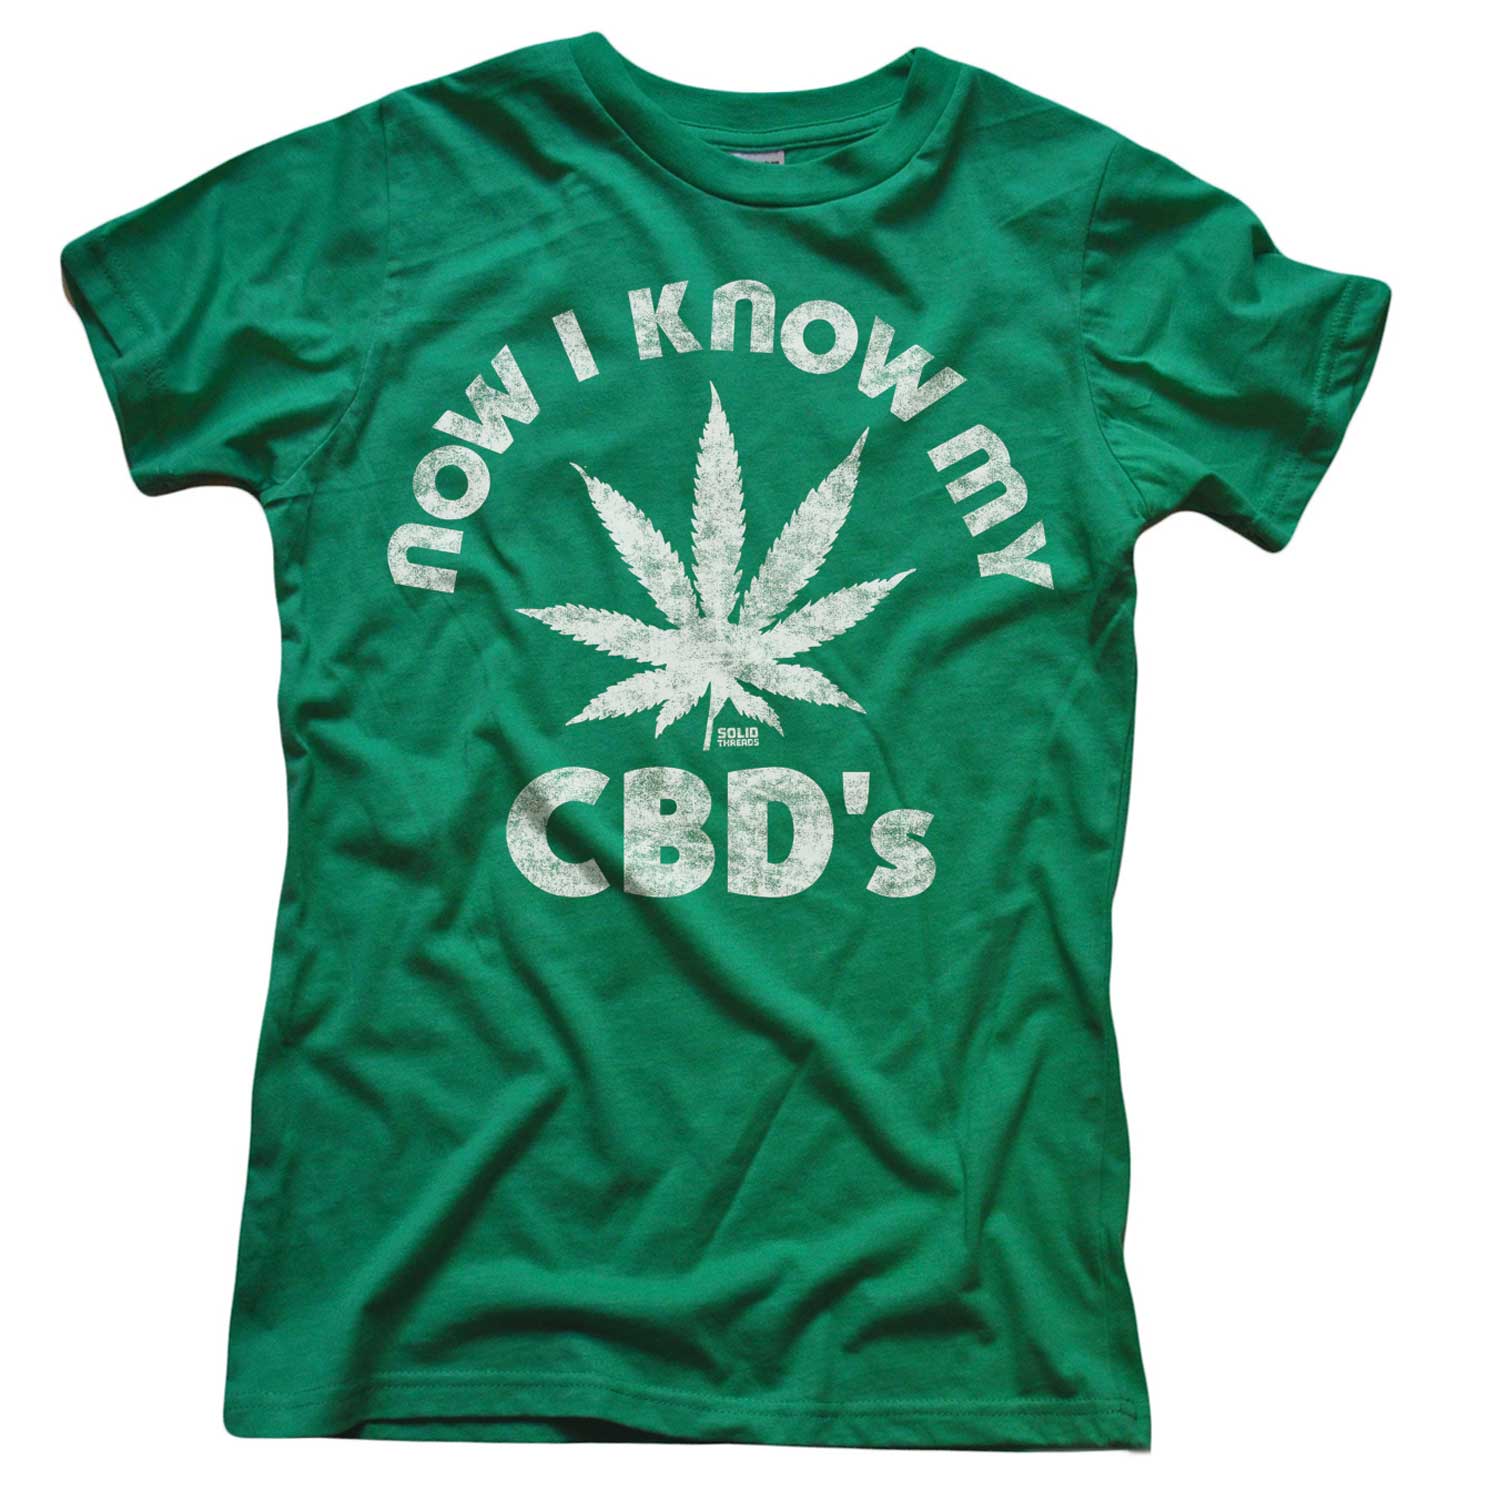 Women's Now I Know My CBD's Vintage Graphic Crop Top | Funny Cannabis T-shirt | Solid Threads